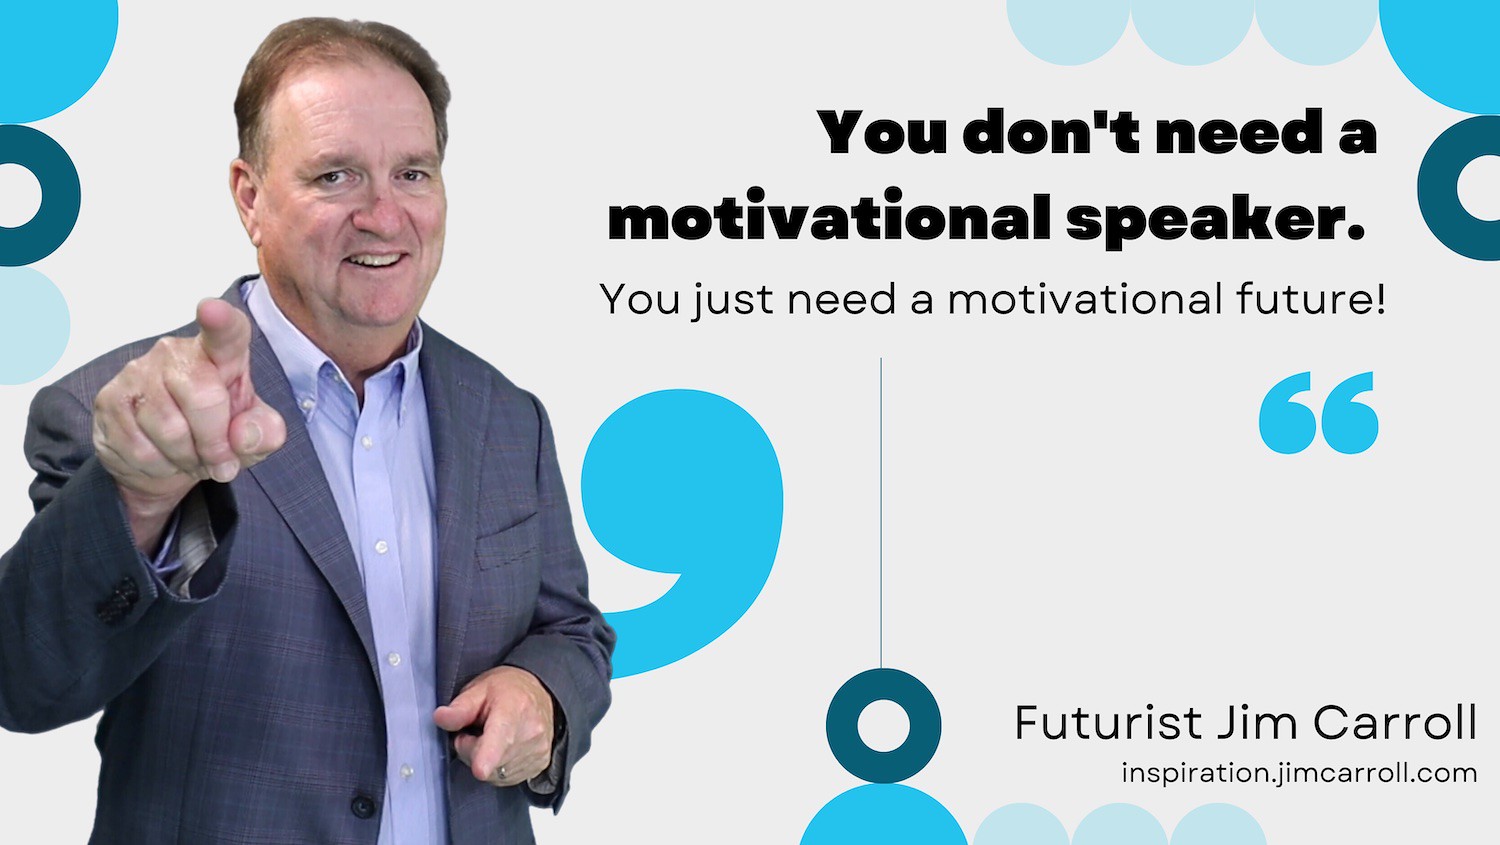 "You don't need a motivational speaker. You just need a motivational future!" - Futurist Jim Carroll